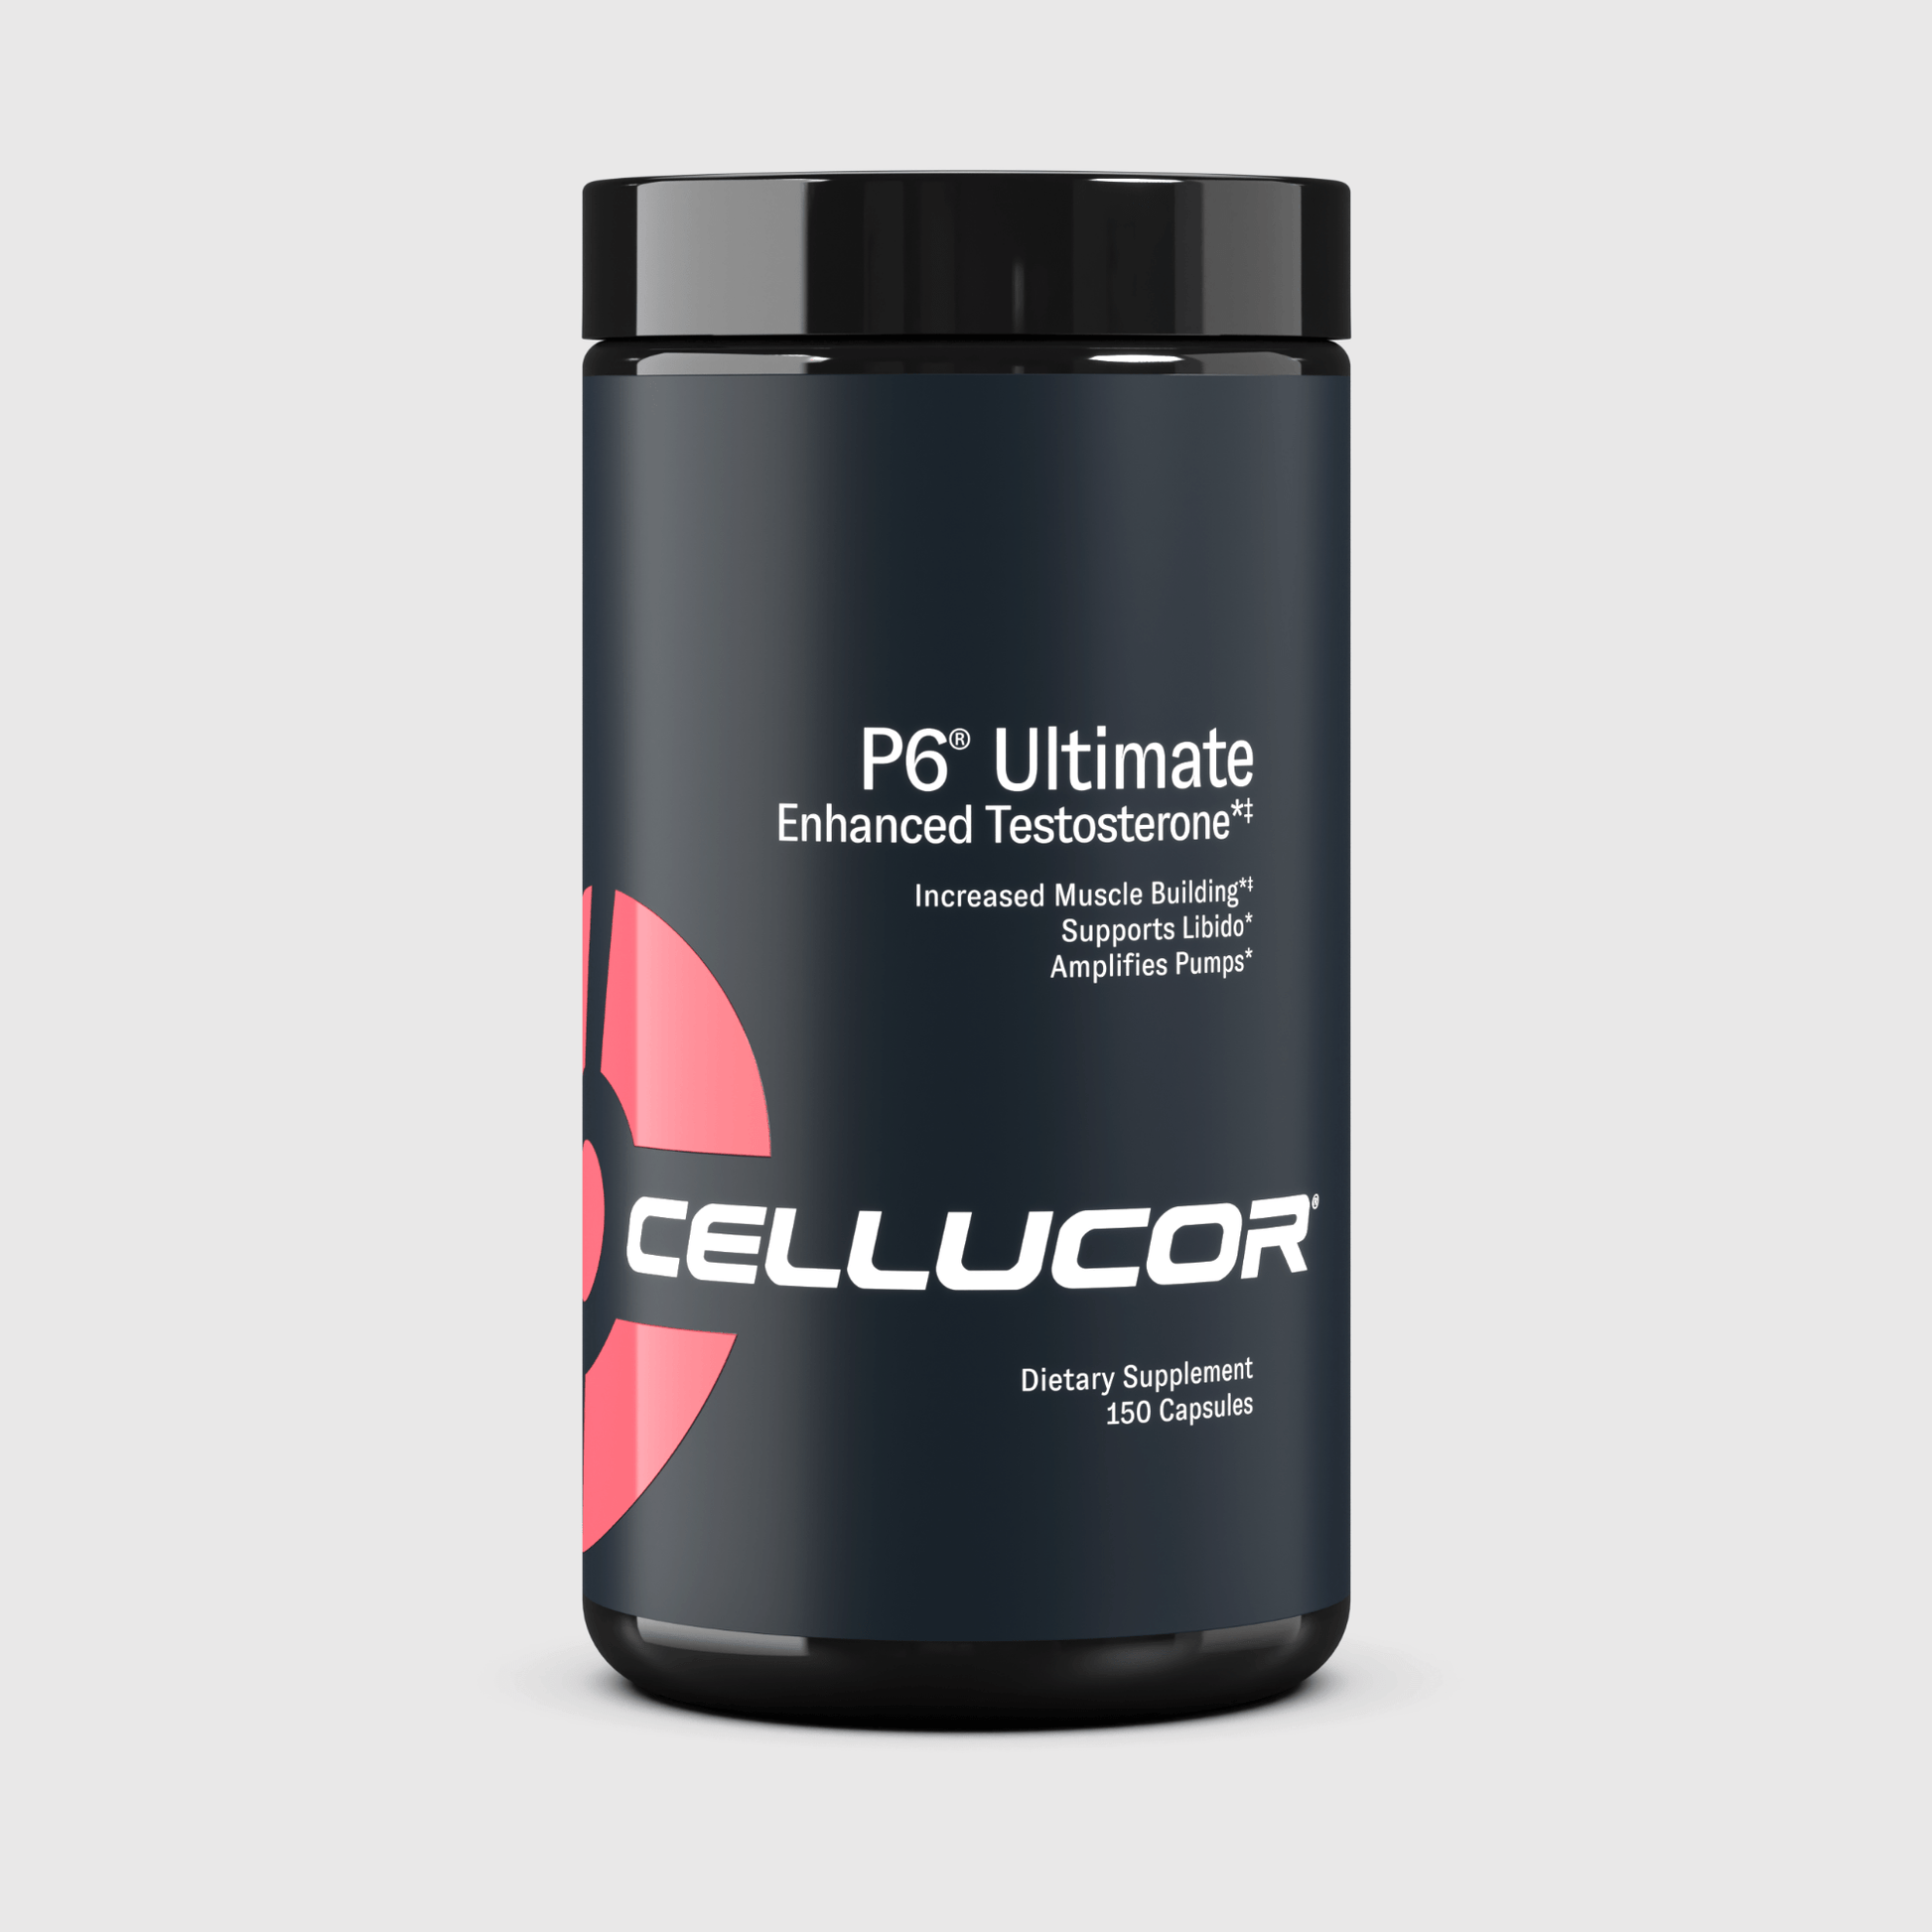 P6® Ultimate Testosterone Booster View 1